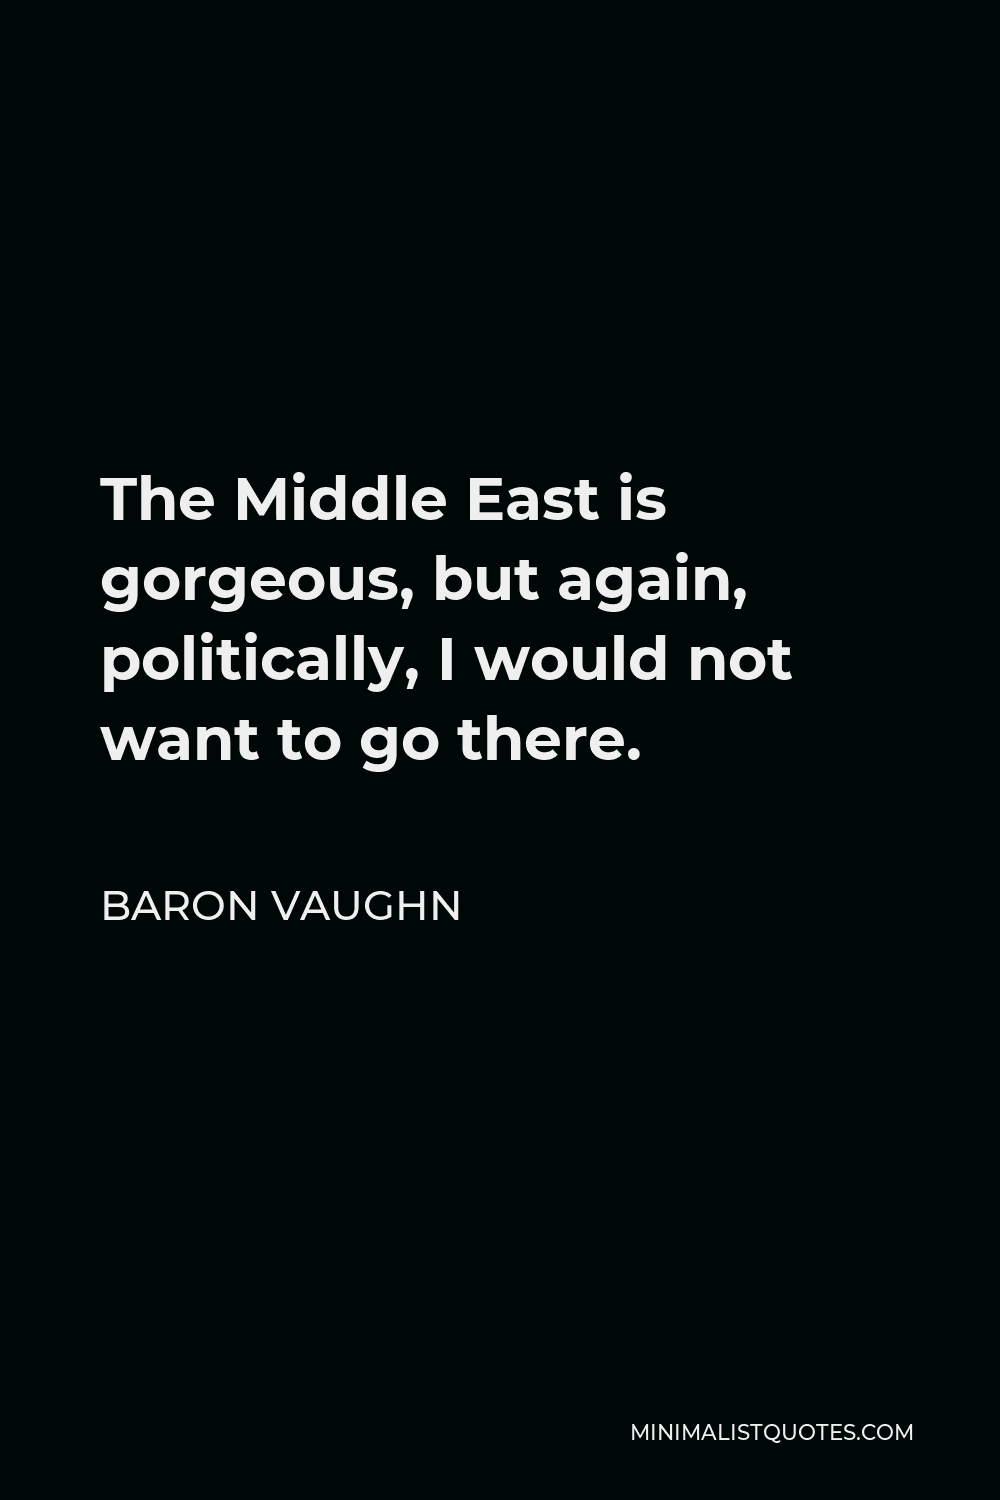 Baron Vaughn Quote - The Middle East is gorgeous, but again, politically, I would not want to go there.